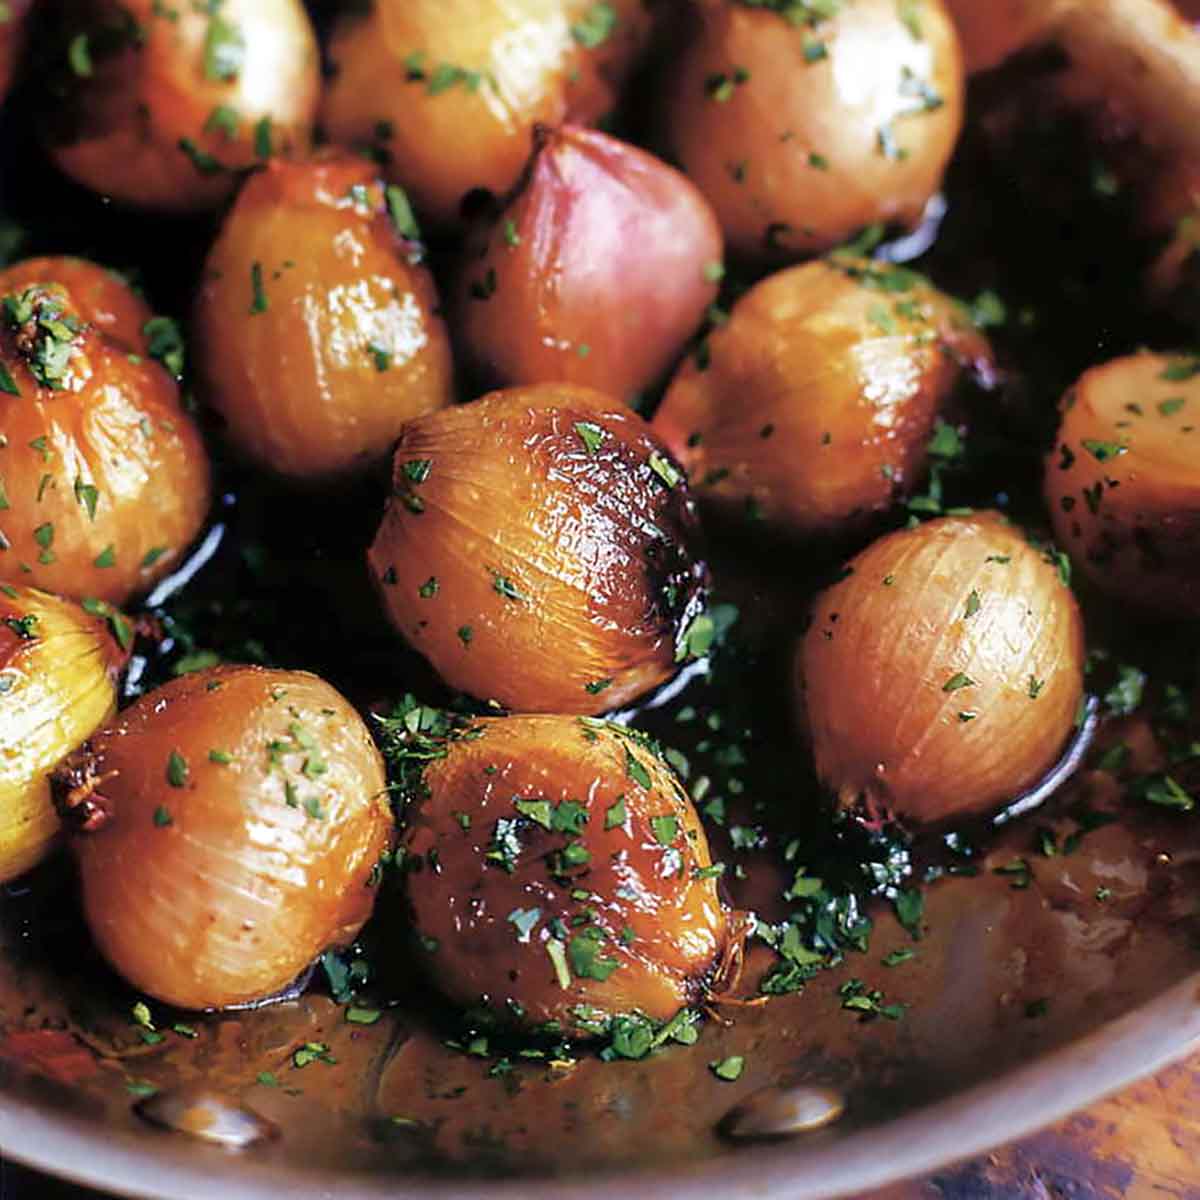 A skillet full of Ina Garten's caramelized shallots, garnished with parsley.